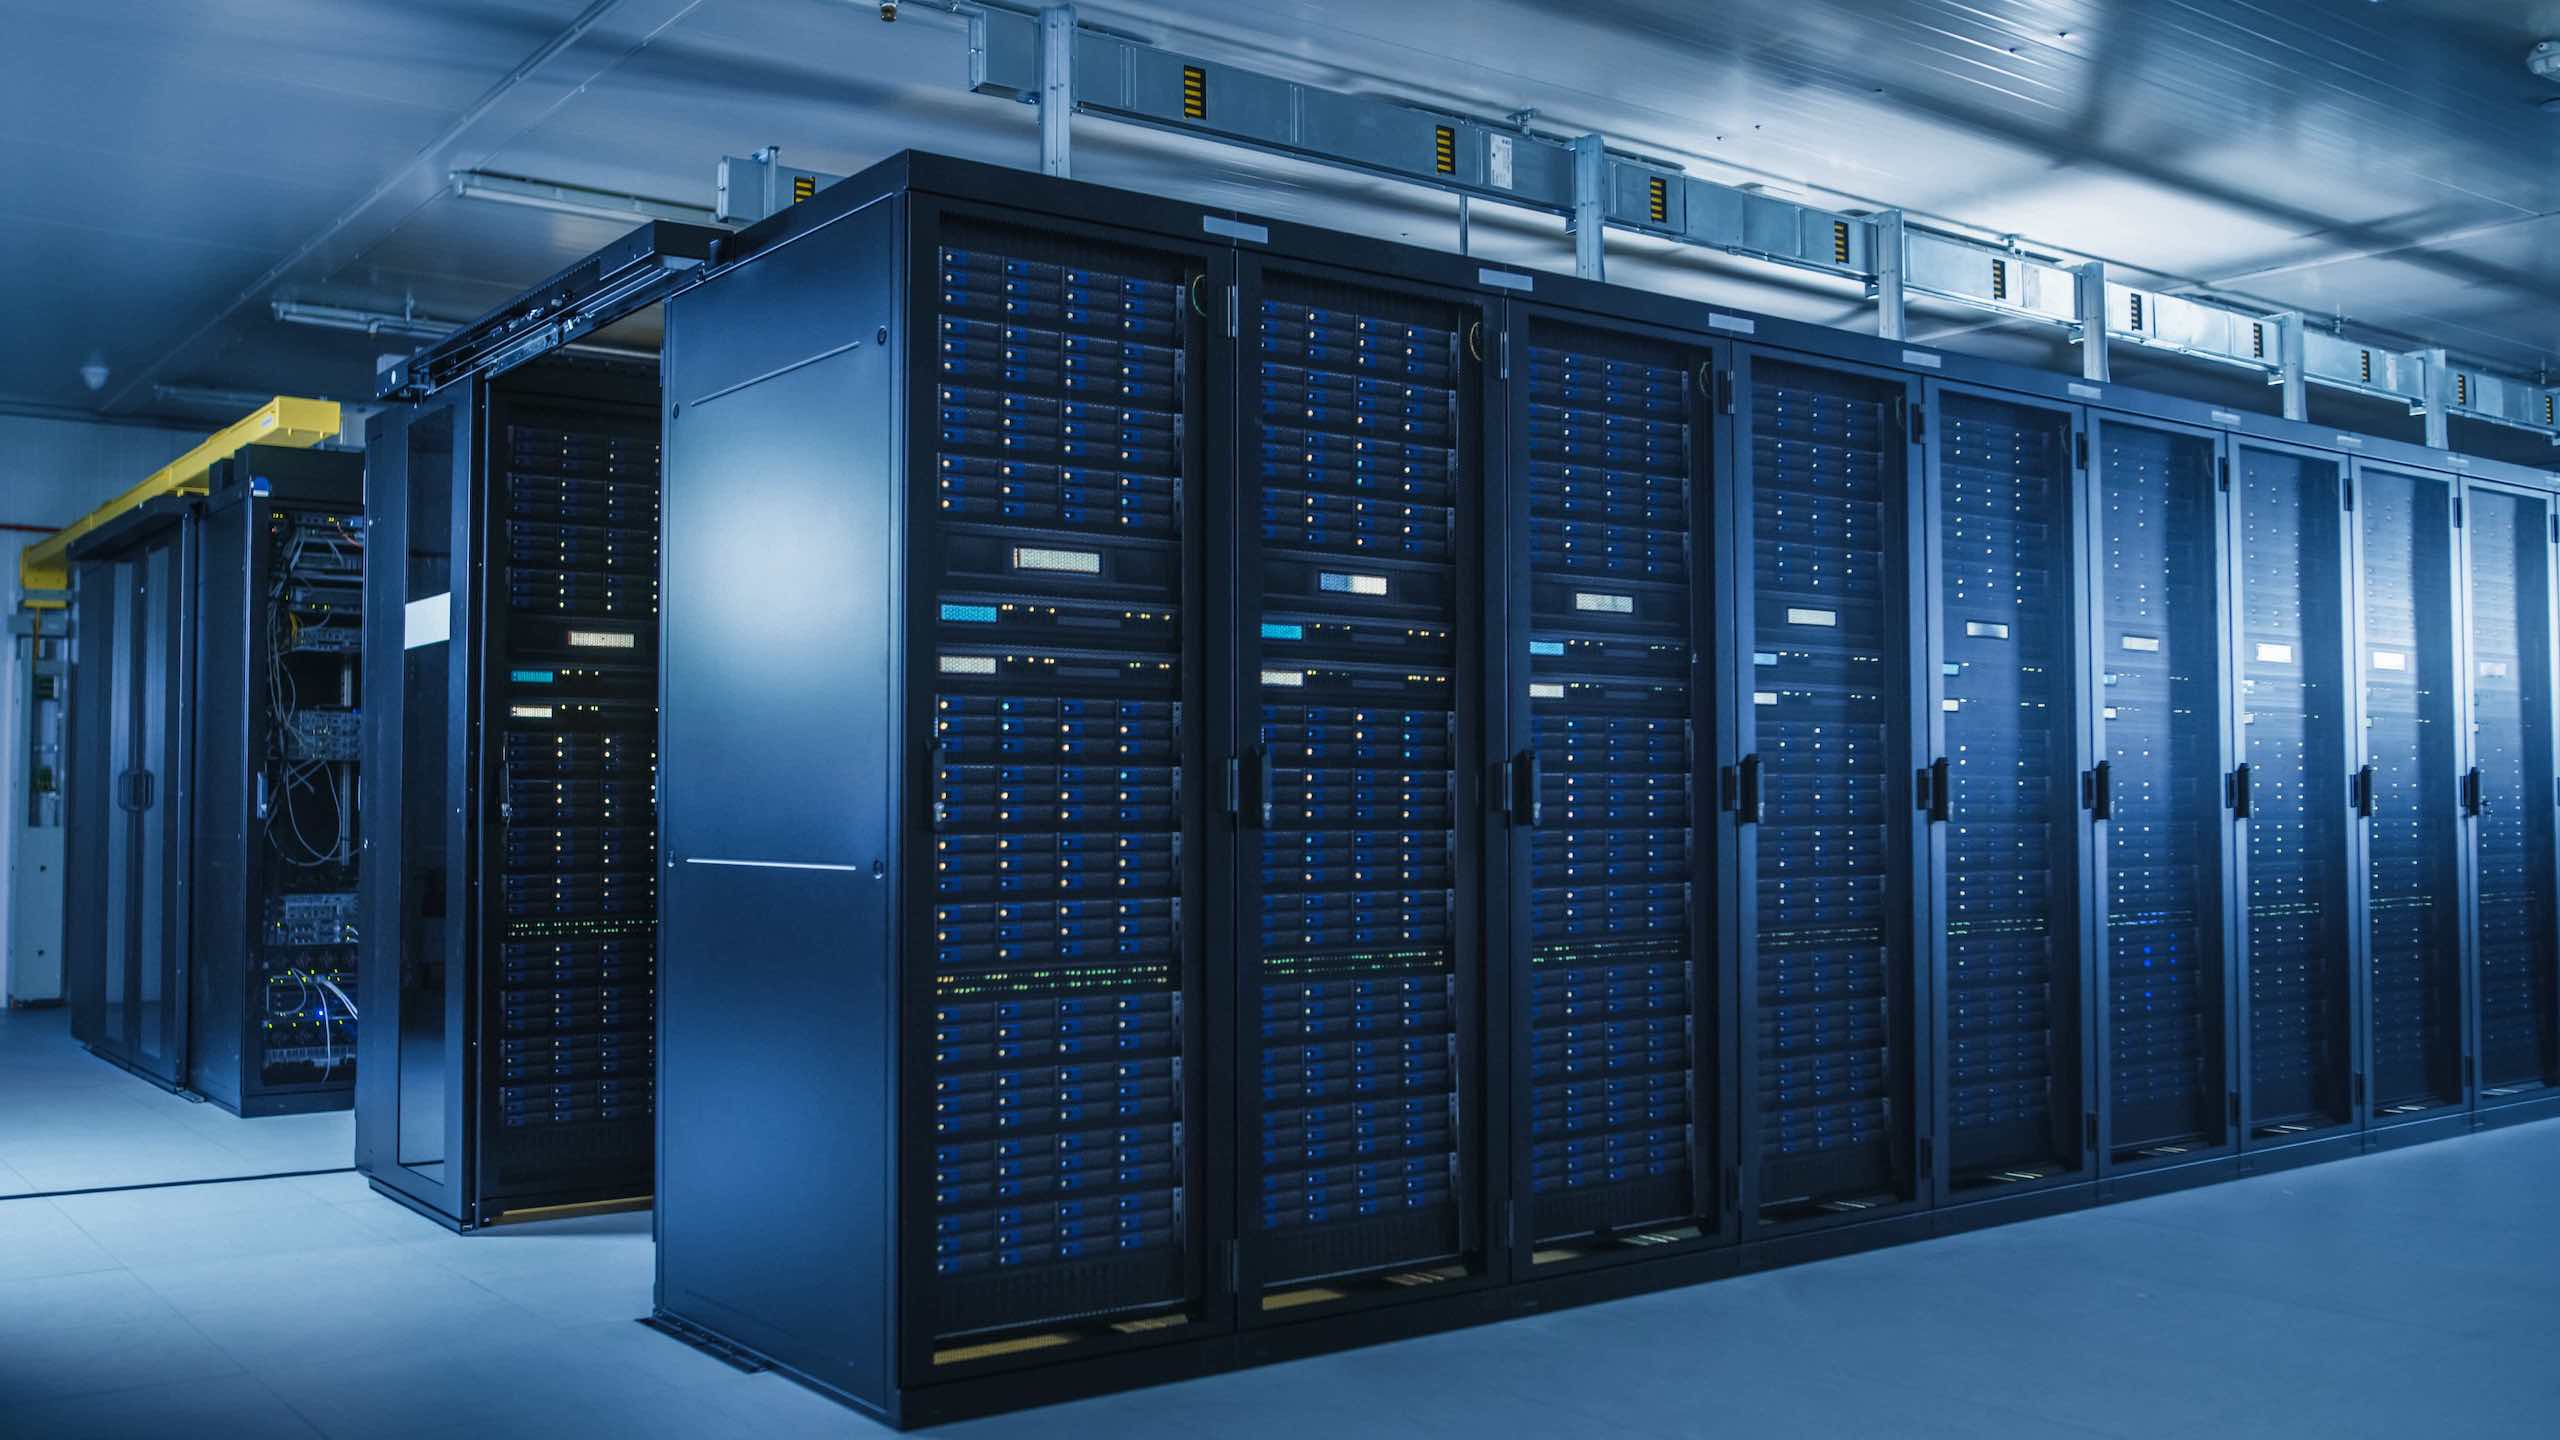 Shot of Modern Data Center With Multiple Rows of Operational Server Racks. Modern High Tech Database Super Computer Clean Room.